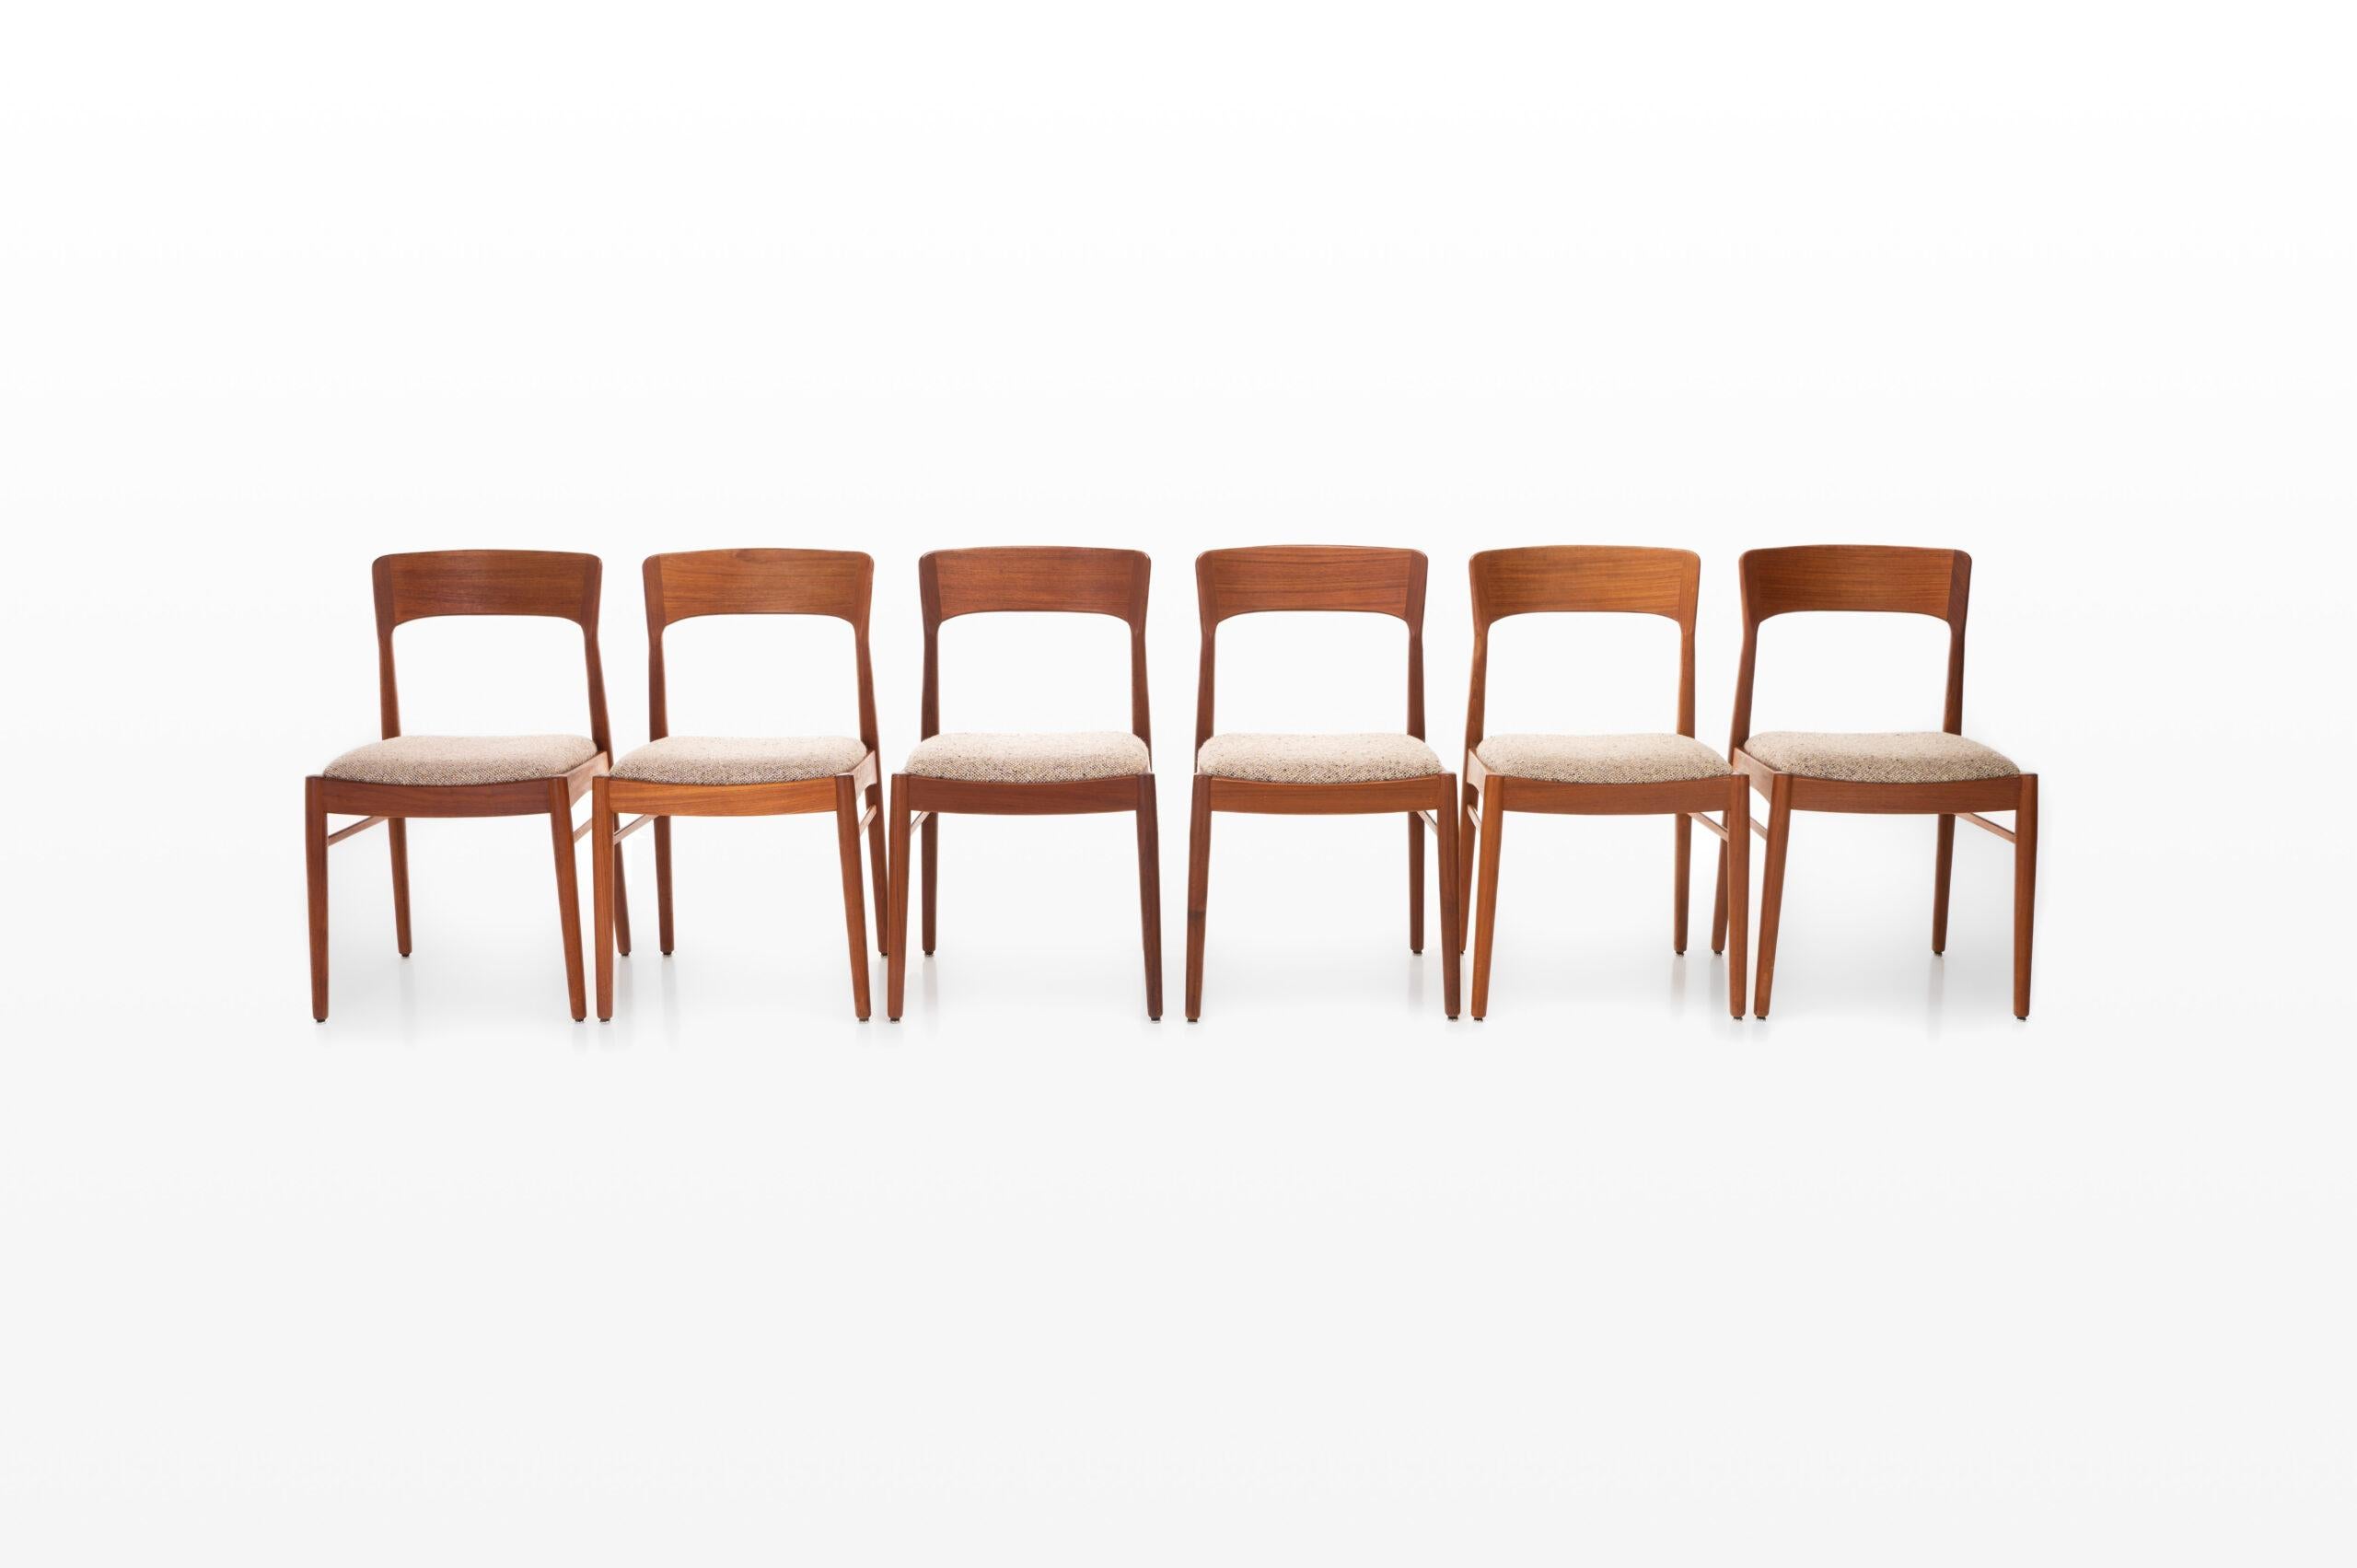 Very nice set of six dining chairs in teak. Designed by Henning Kjaernulf for Korup Stølefabrik in Denmark in the 1960s. The chairs still have the original Kvadrat upholstery.

12 pieces available, price is for 6 pieces.